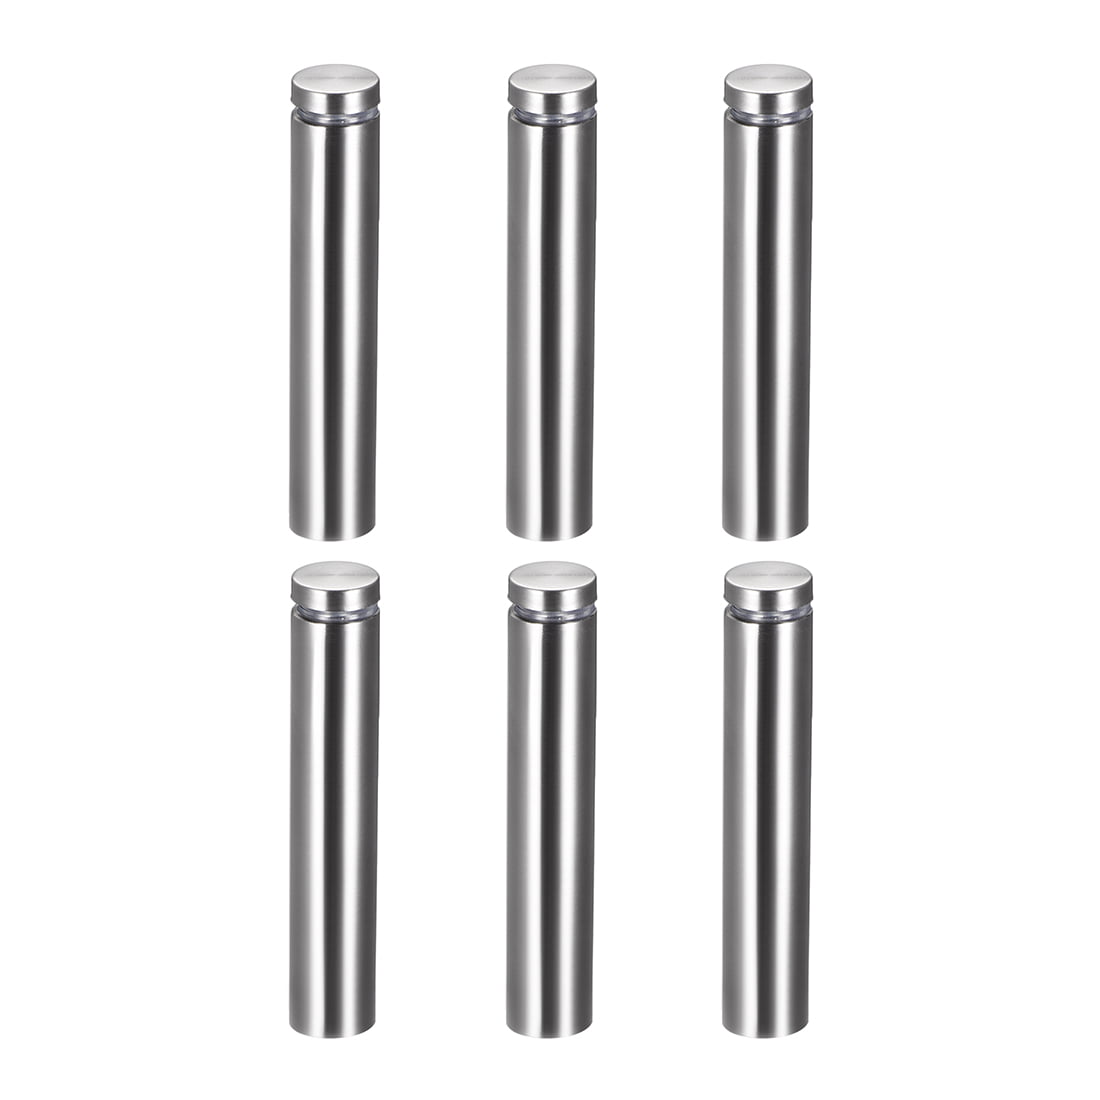 Glass Standoff Mount Stainless Steel Wall Standoff 19mm Dia 102mm ...